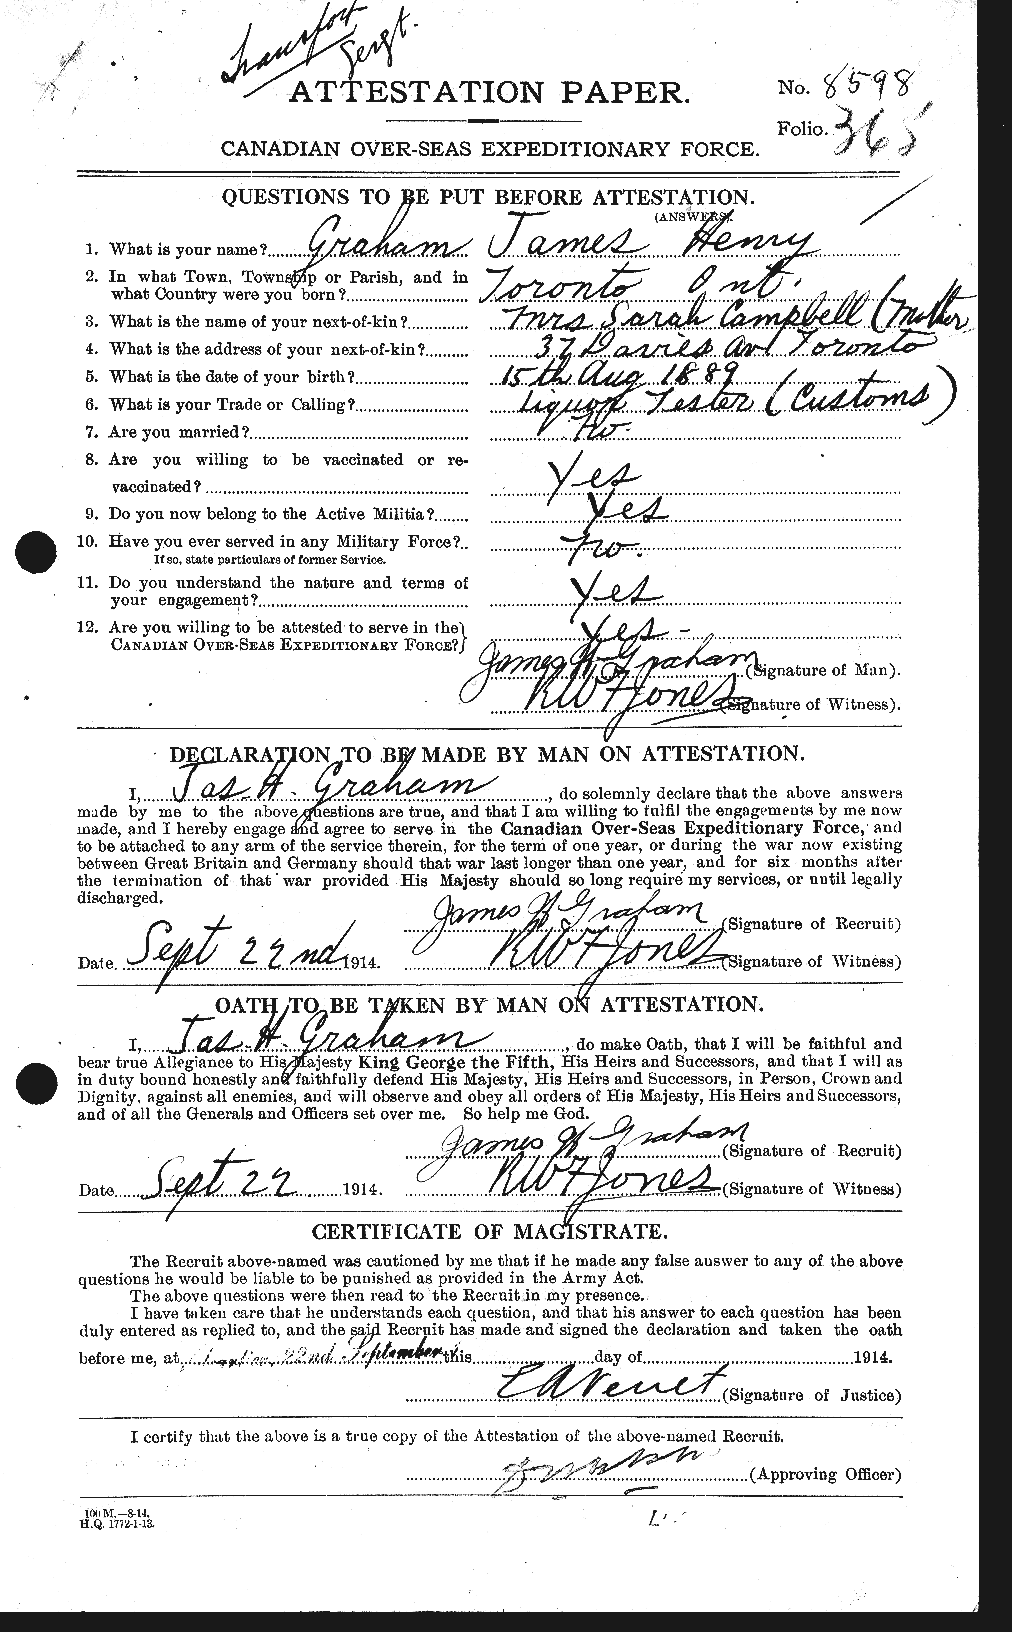 Personnel Records of the First World War - CEF 357824a